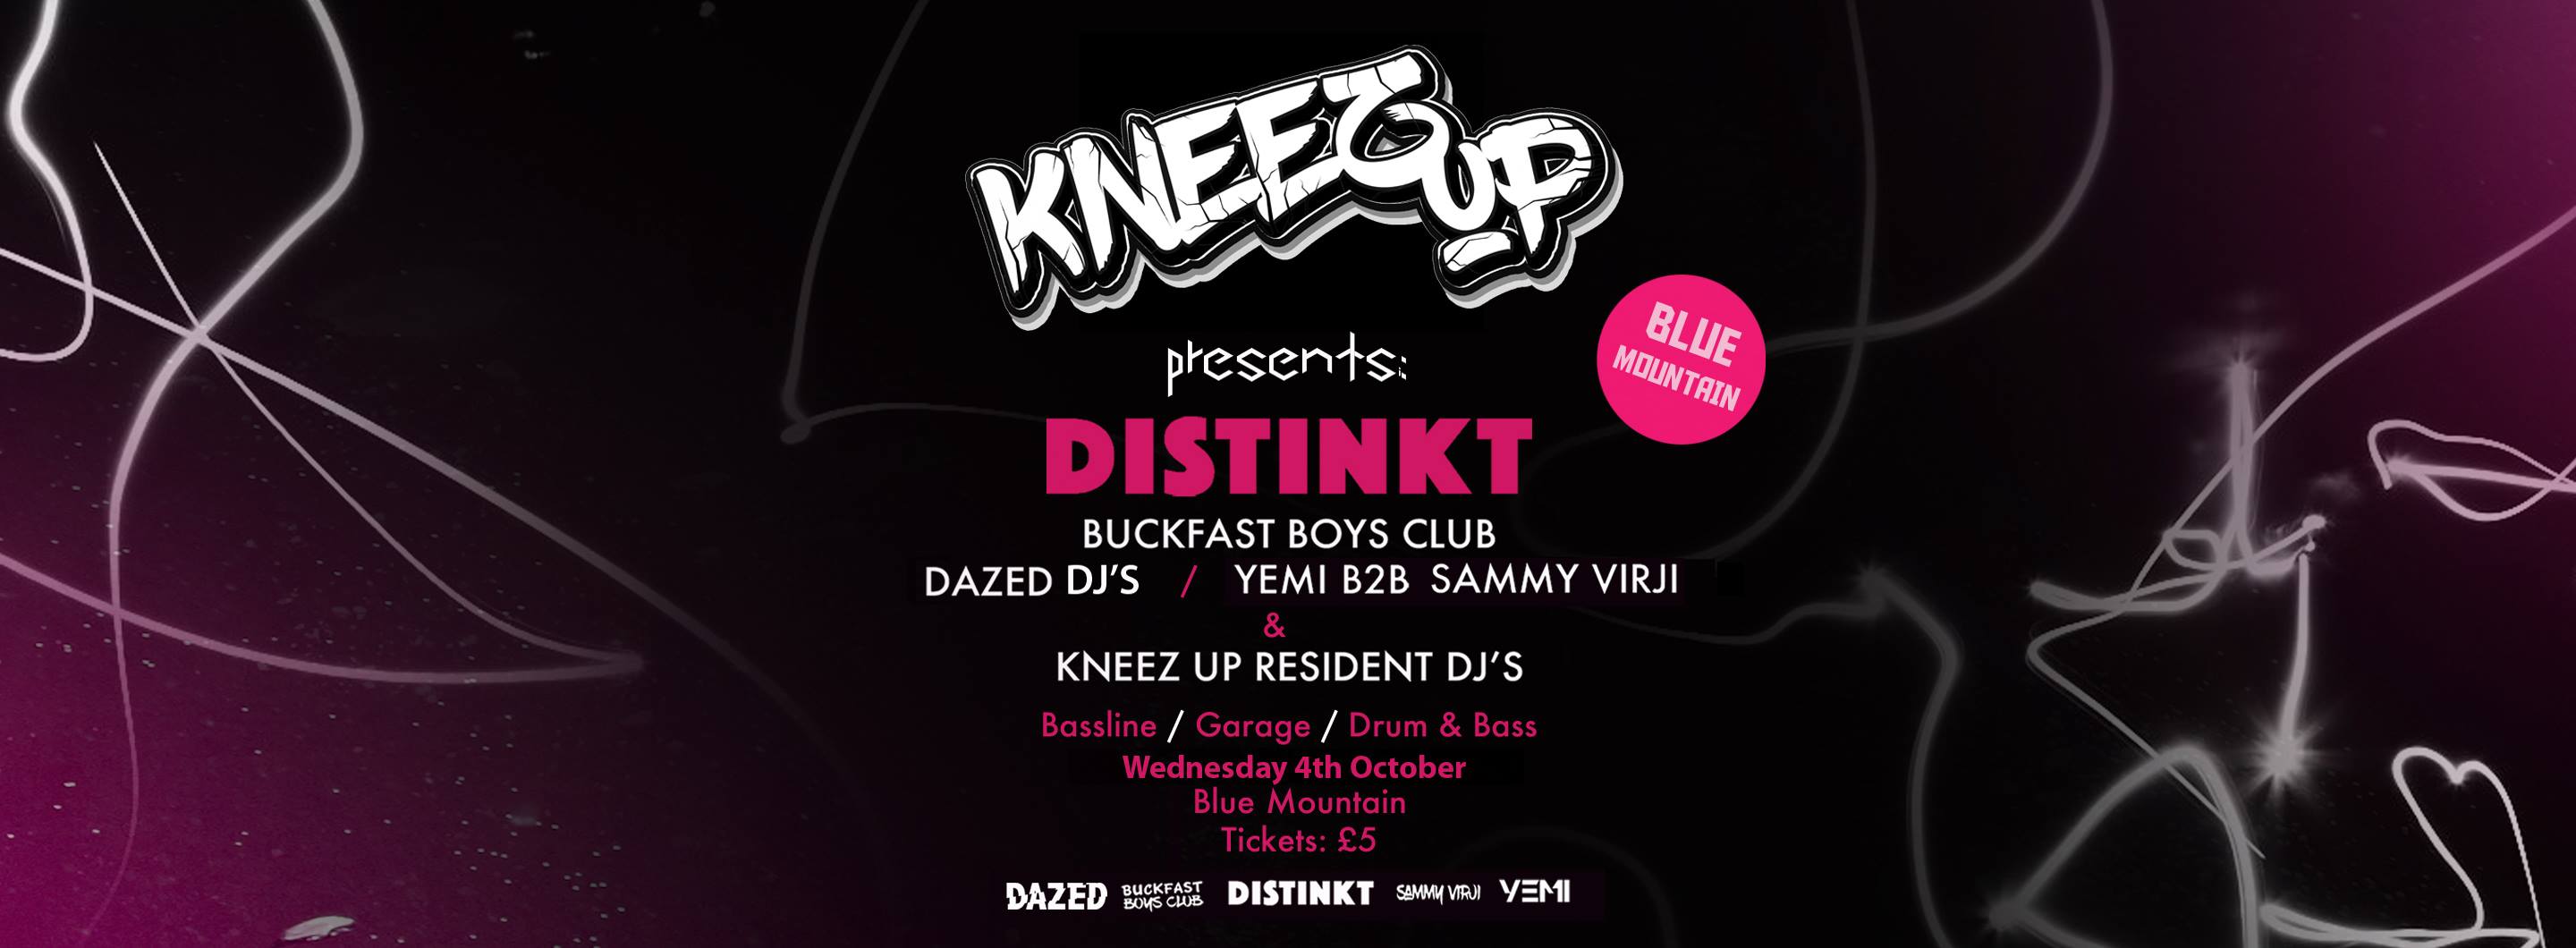 Pink and Blue Mountain Logo - Kneez Up Presents: Distinkt at Blue Mountain!